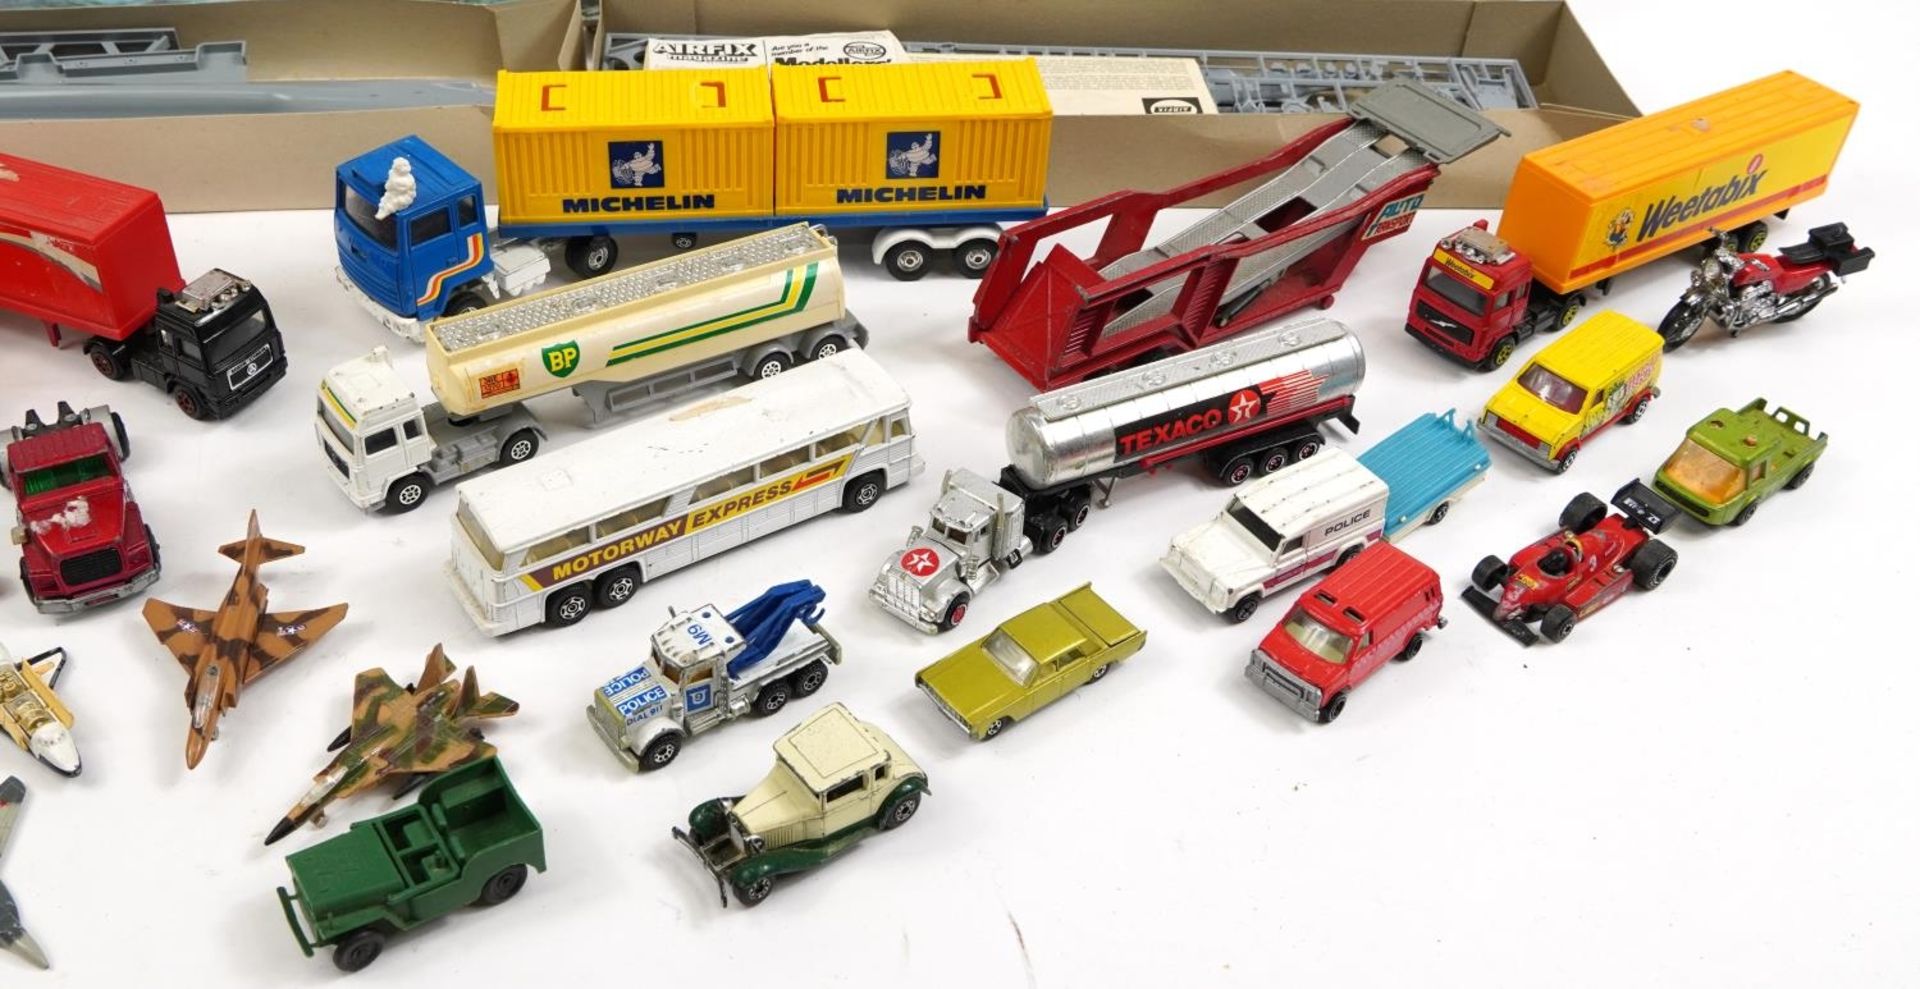 Vintage and later diecast vehicles including Corgi advertising container lorries, Matchbox, Airfix - Image 8 of 8